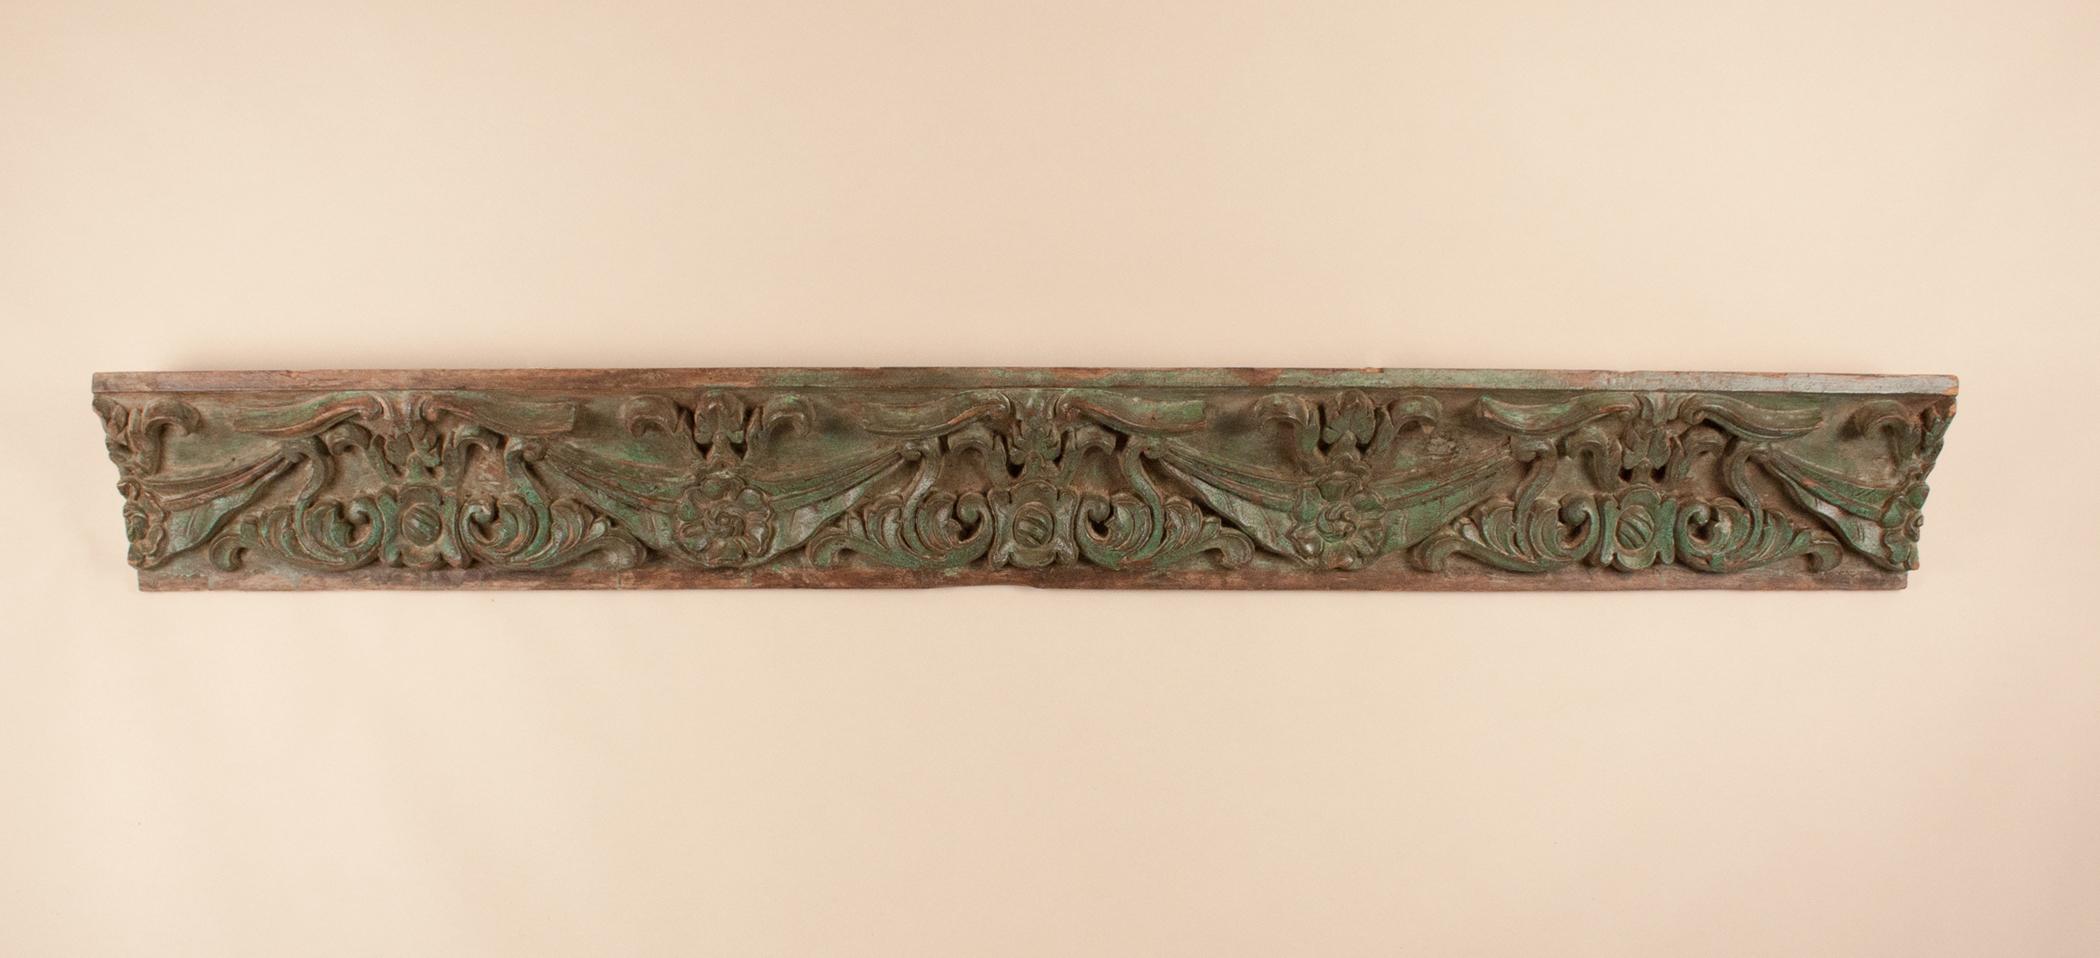 A beautiful, authentic architectural artifact from Ahmedabad, India. This circa 1850 hand carved teak wood panel is a section of ceiling cornice likely from the haveli of a prosperous Indian family. The wood is carved in 1 inch relief, and retains